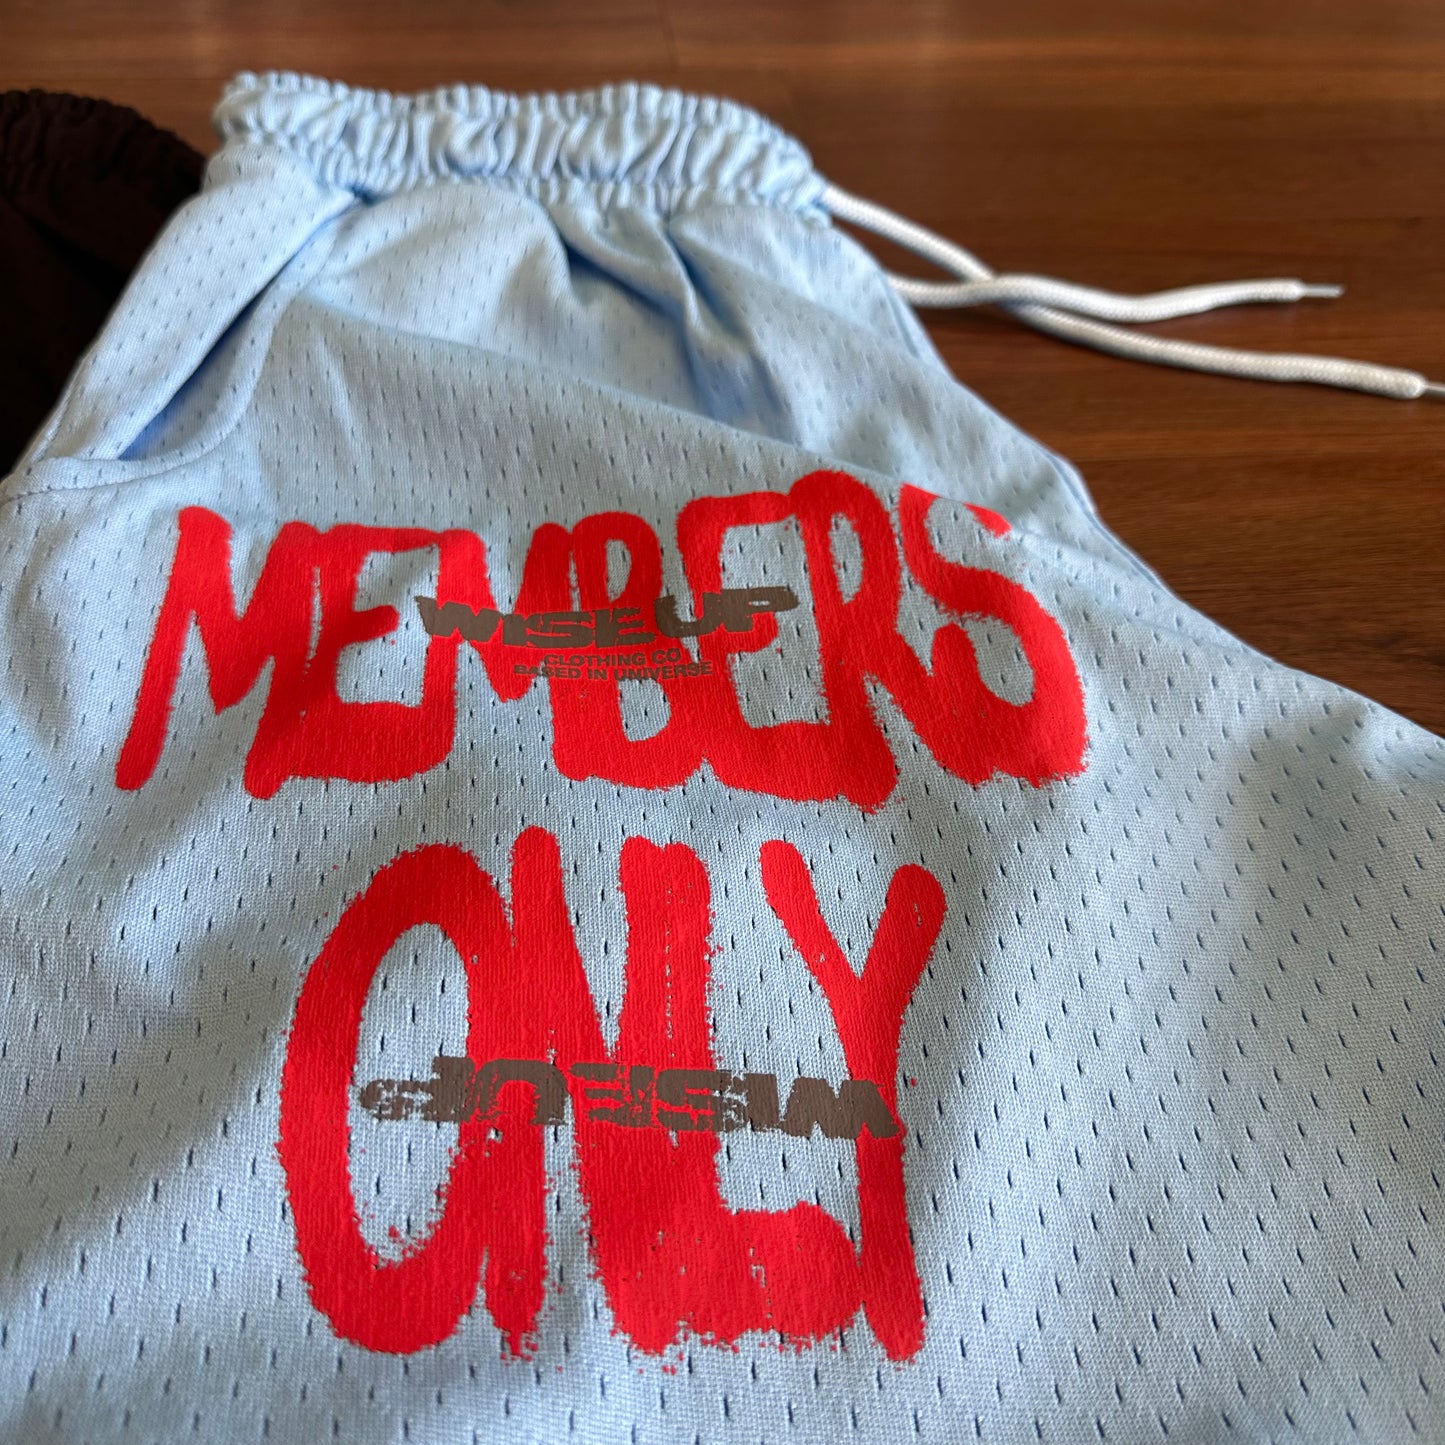 Members Only Gym Shorts